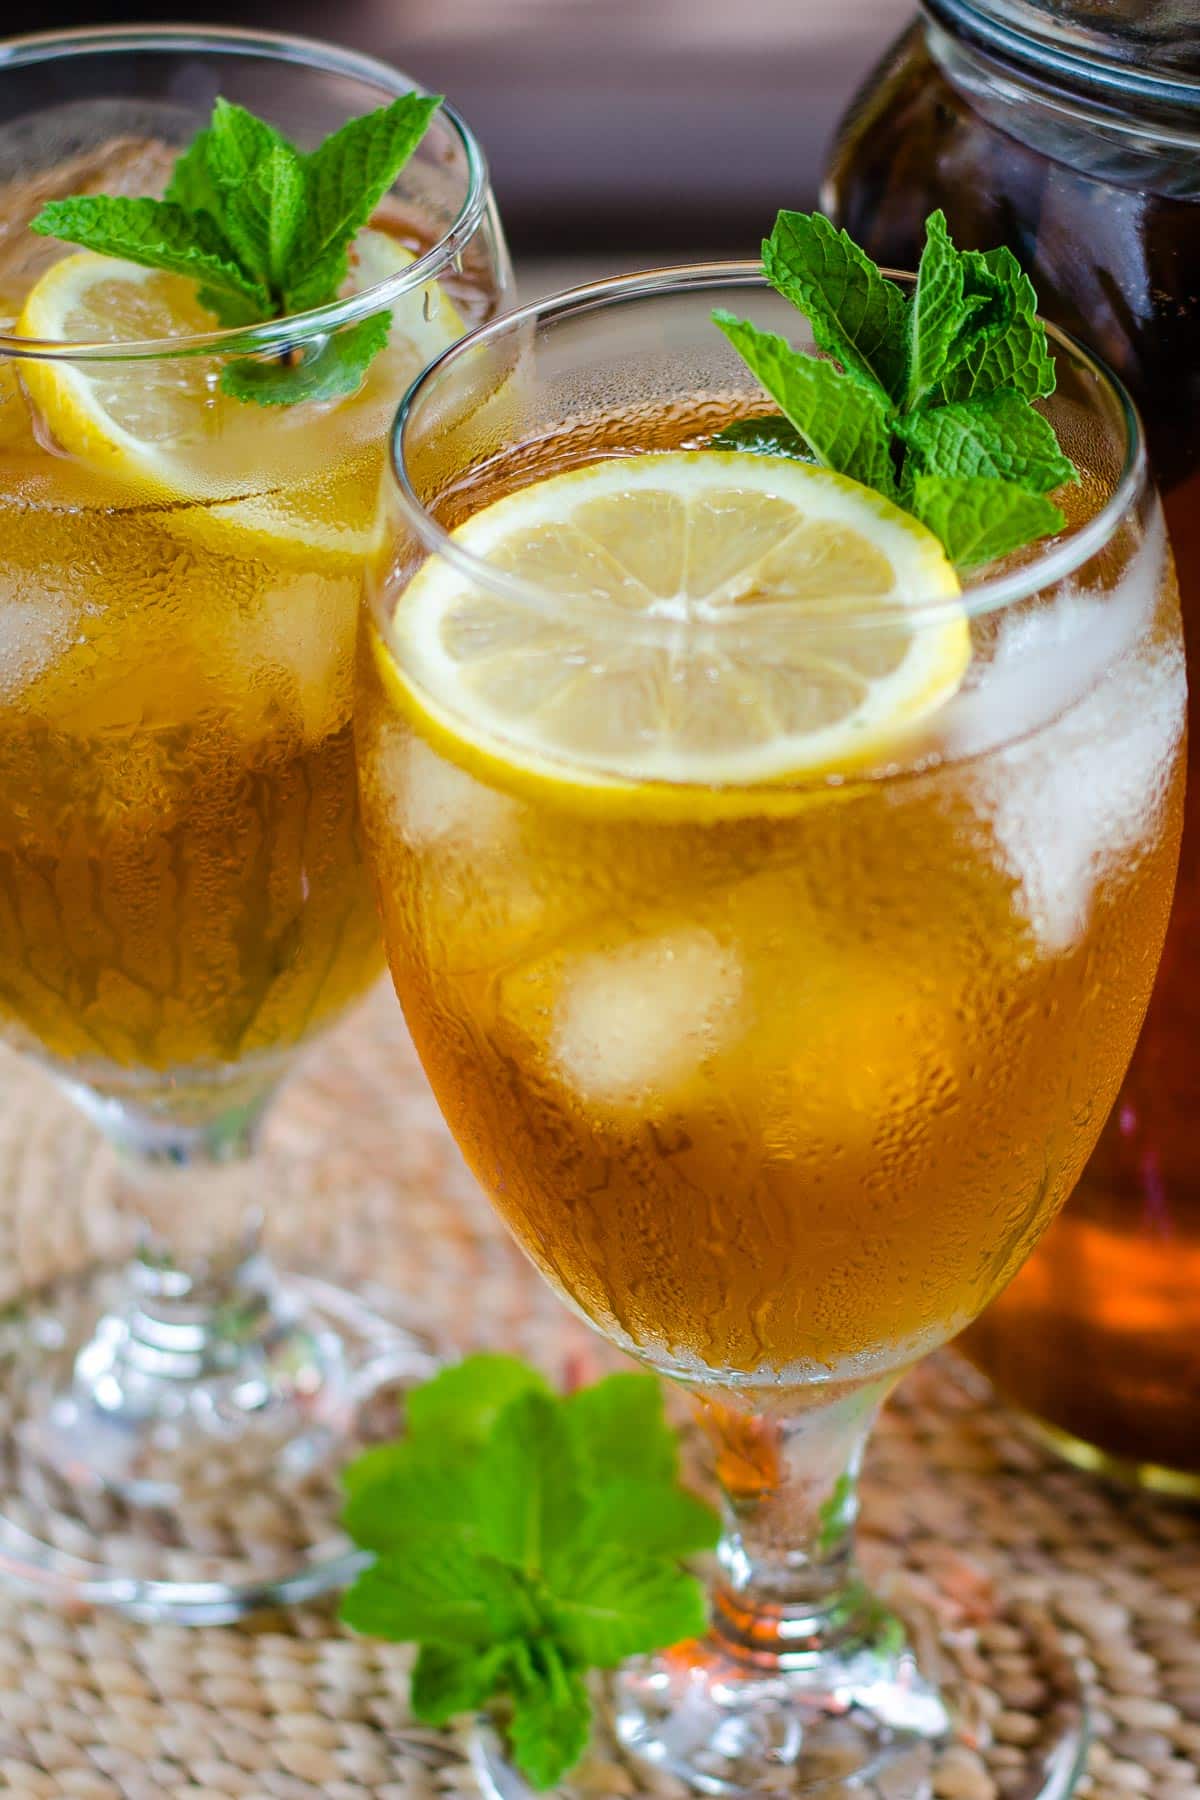 Glasses of iced tea with lemon and mint